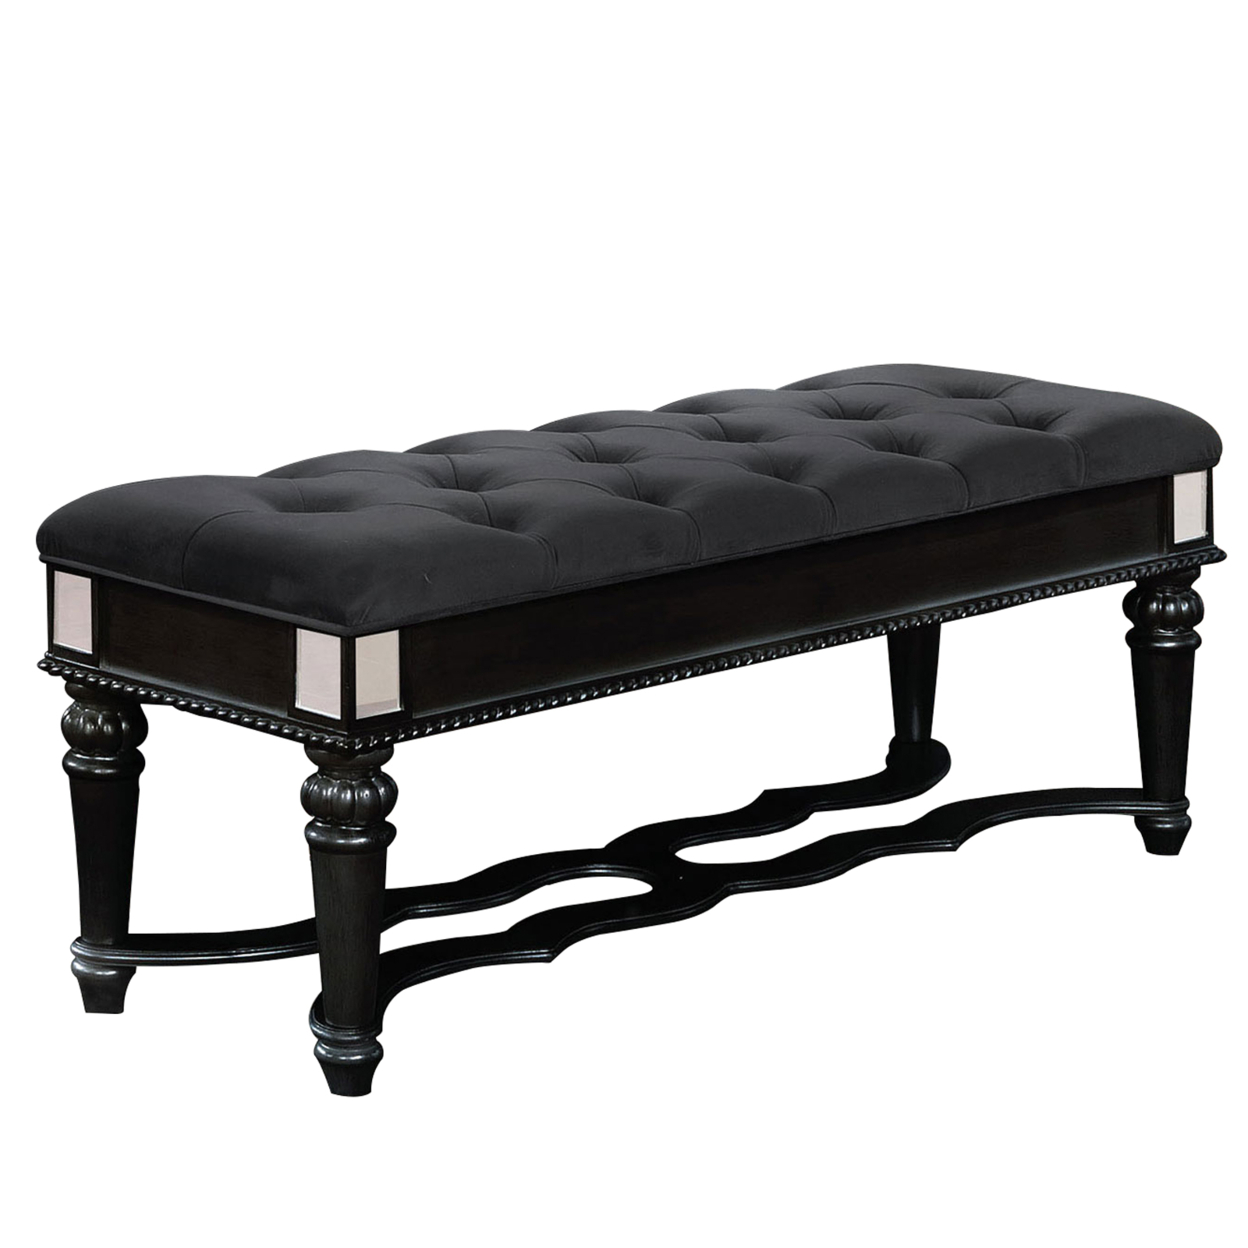 Fabric Padded Bench With Deep Button Tufting And Turned Legs, Black- Saltoro Sherpi